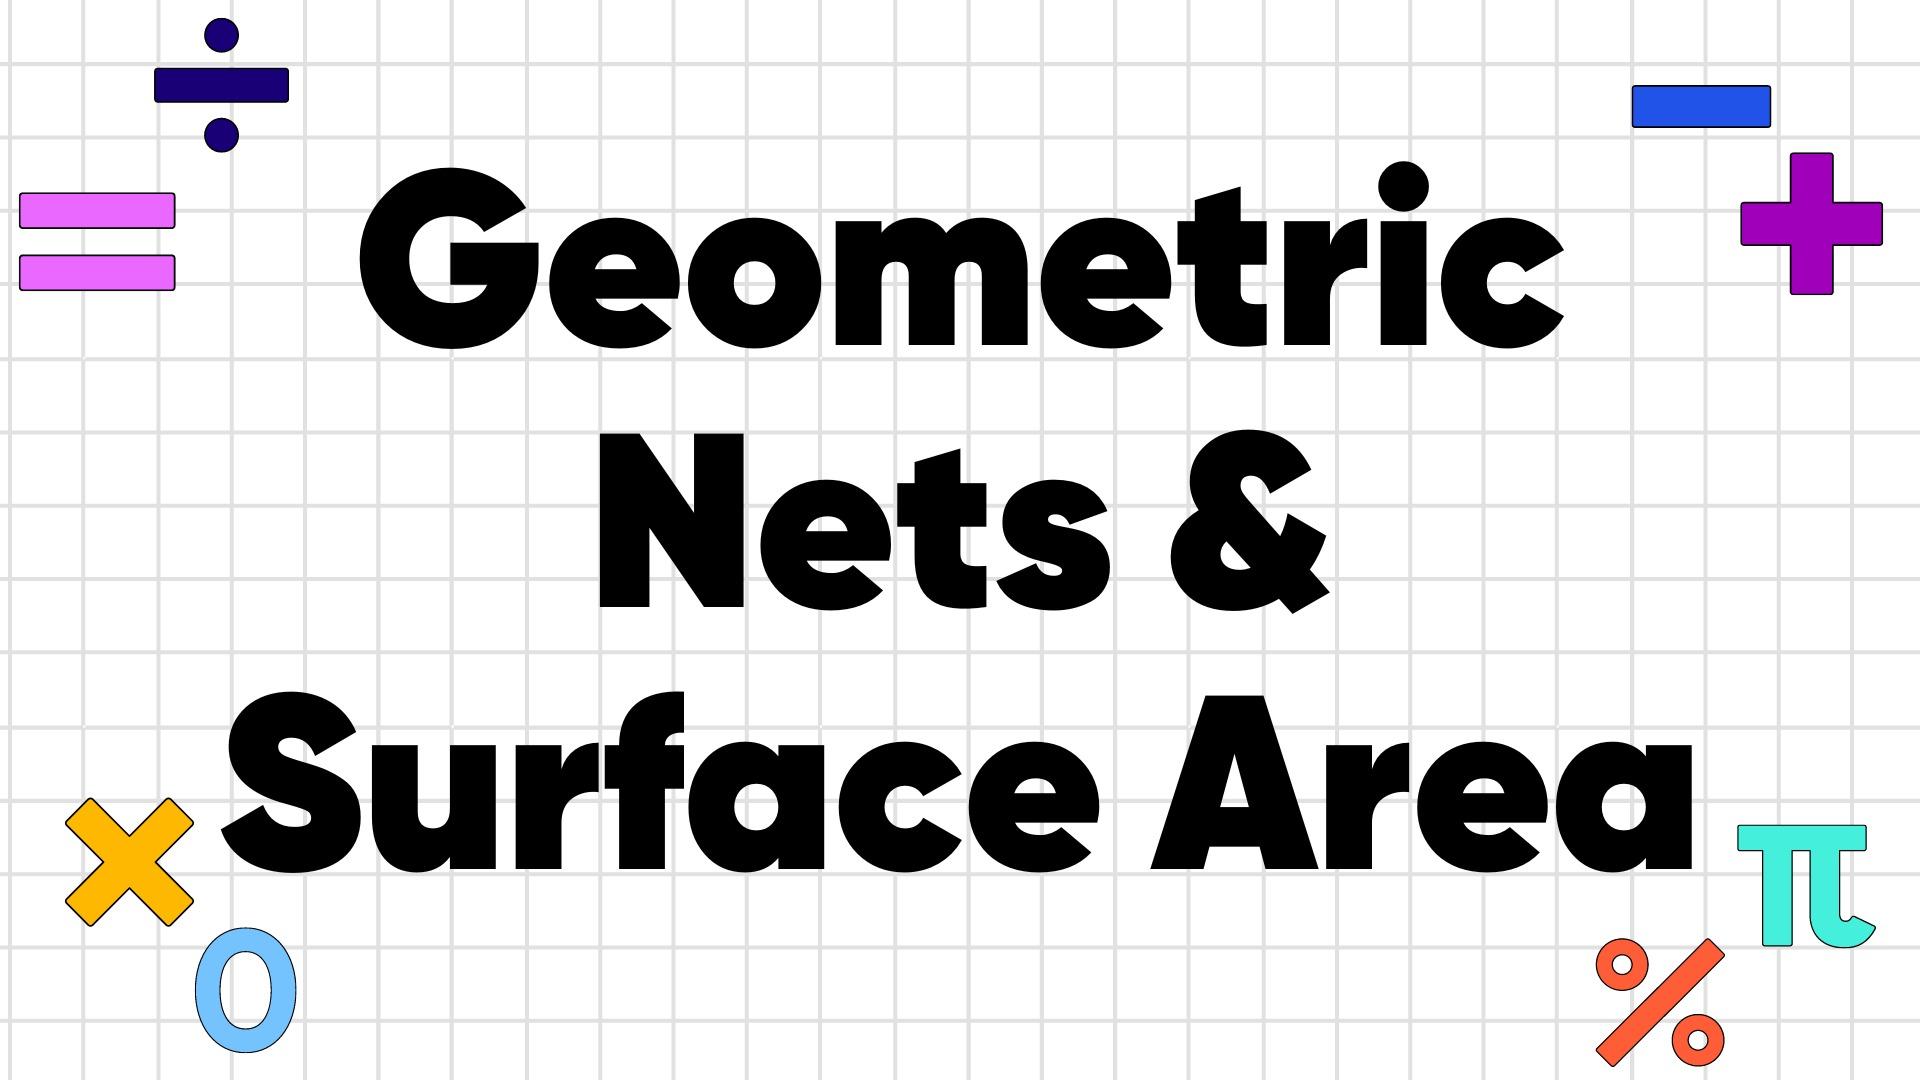 How To Use Nets To Find Surface Area of Rectangular Prisms